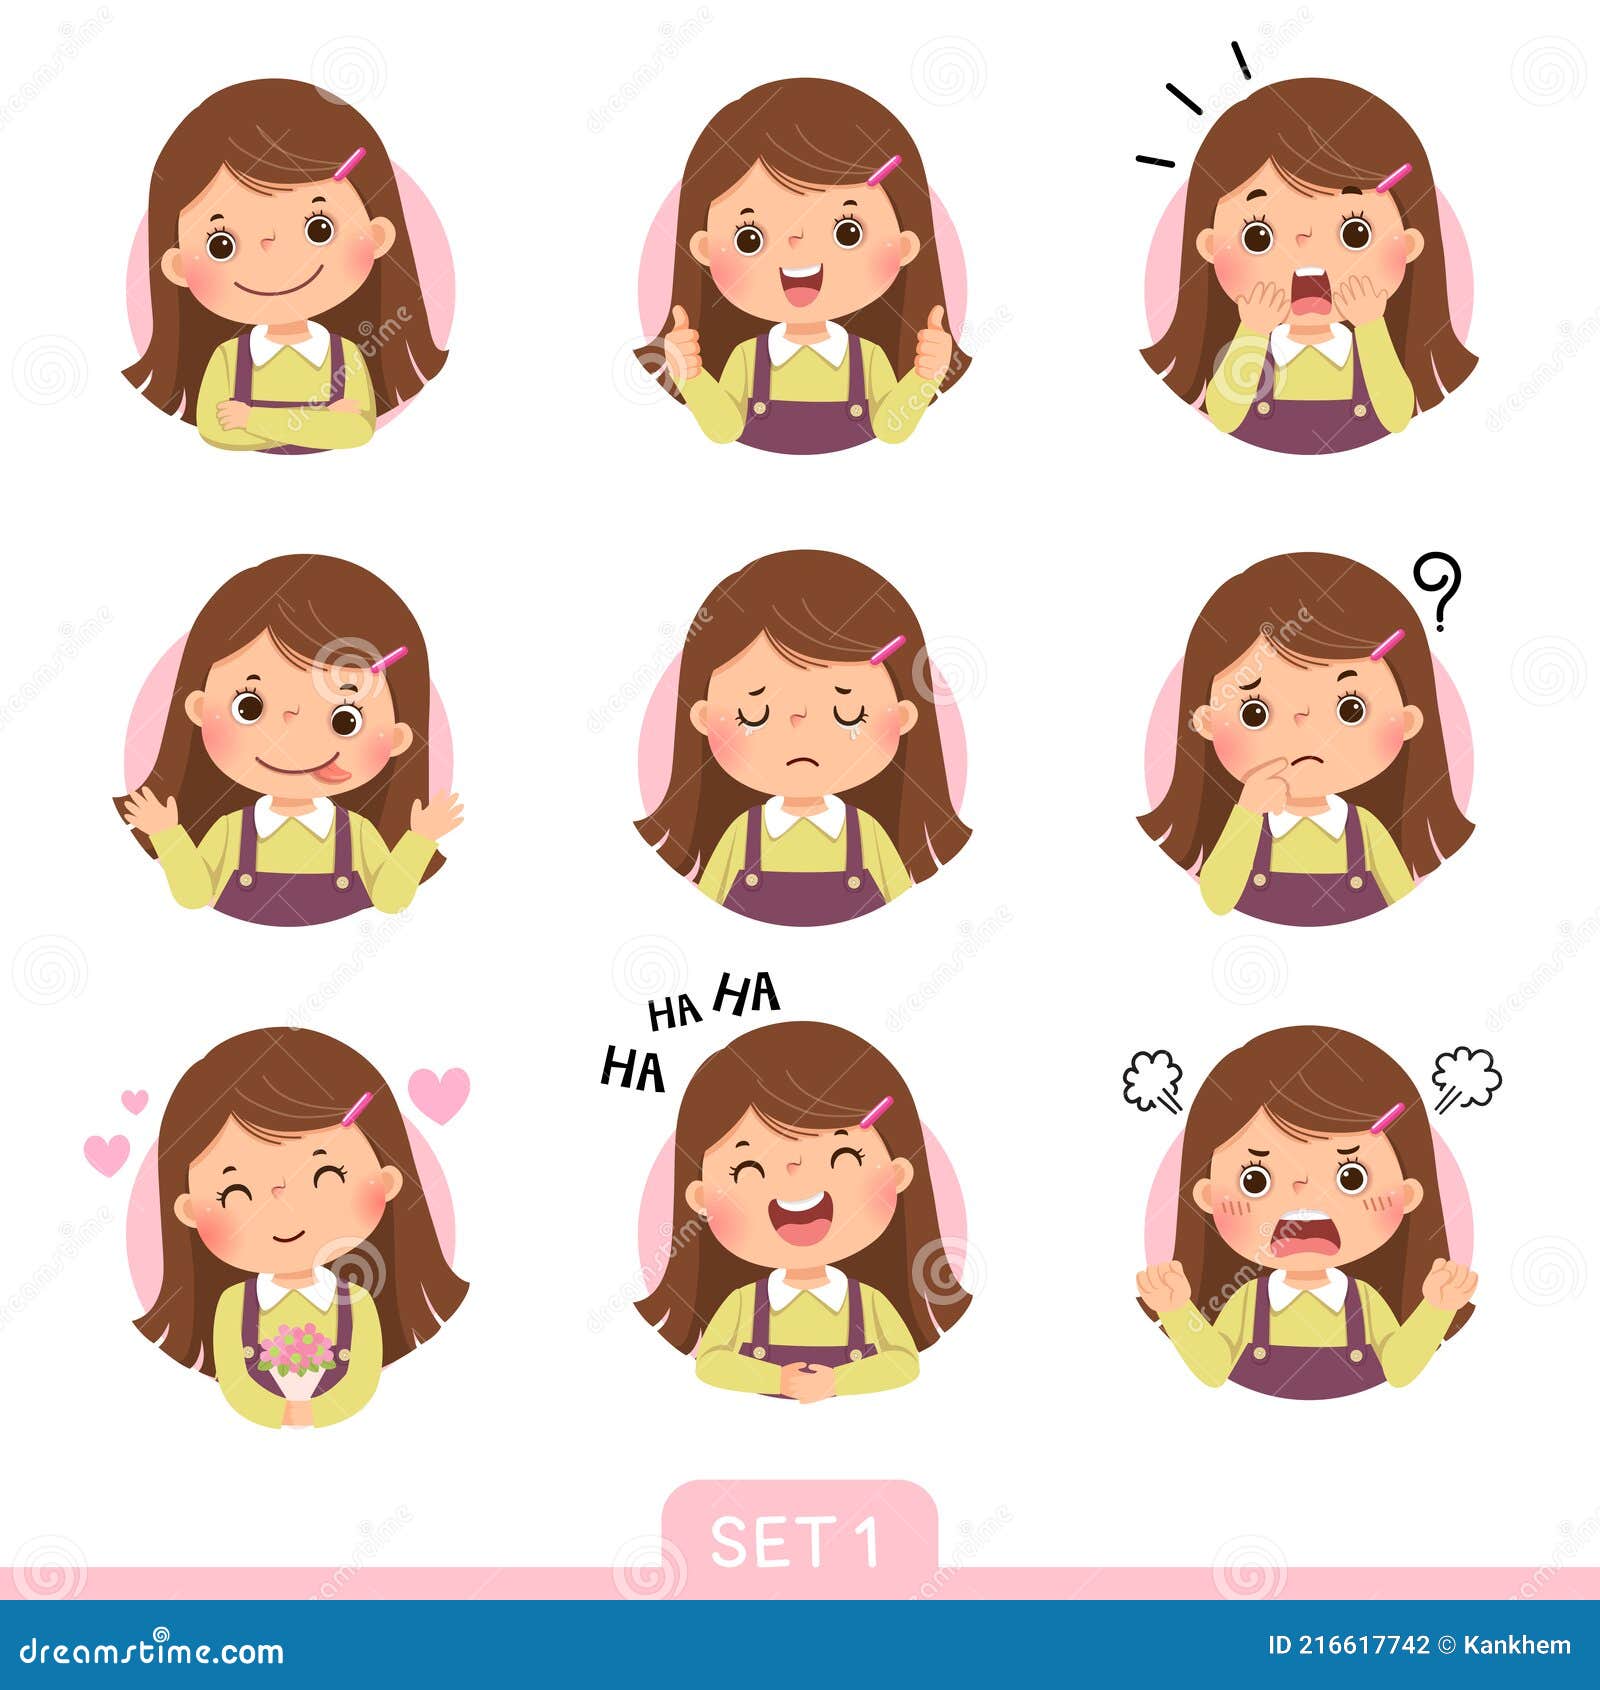 cartoon set of a little girl in different postures with various emotions. set 1 of 3